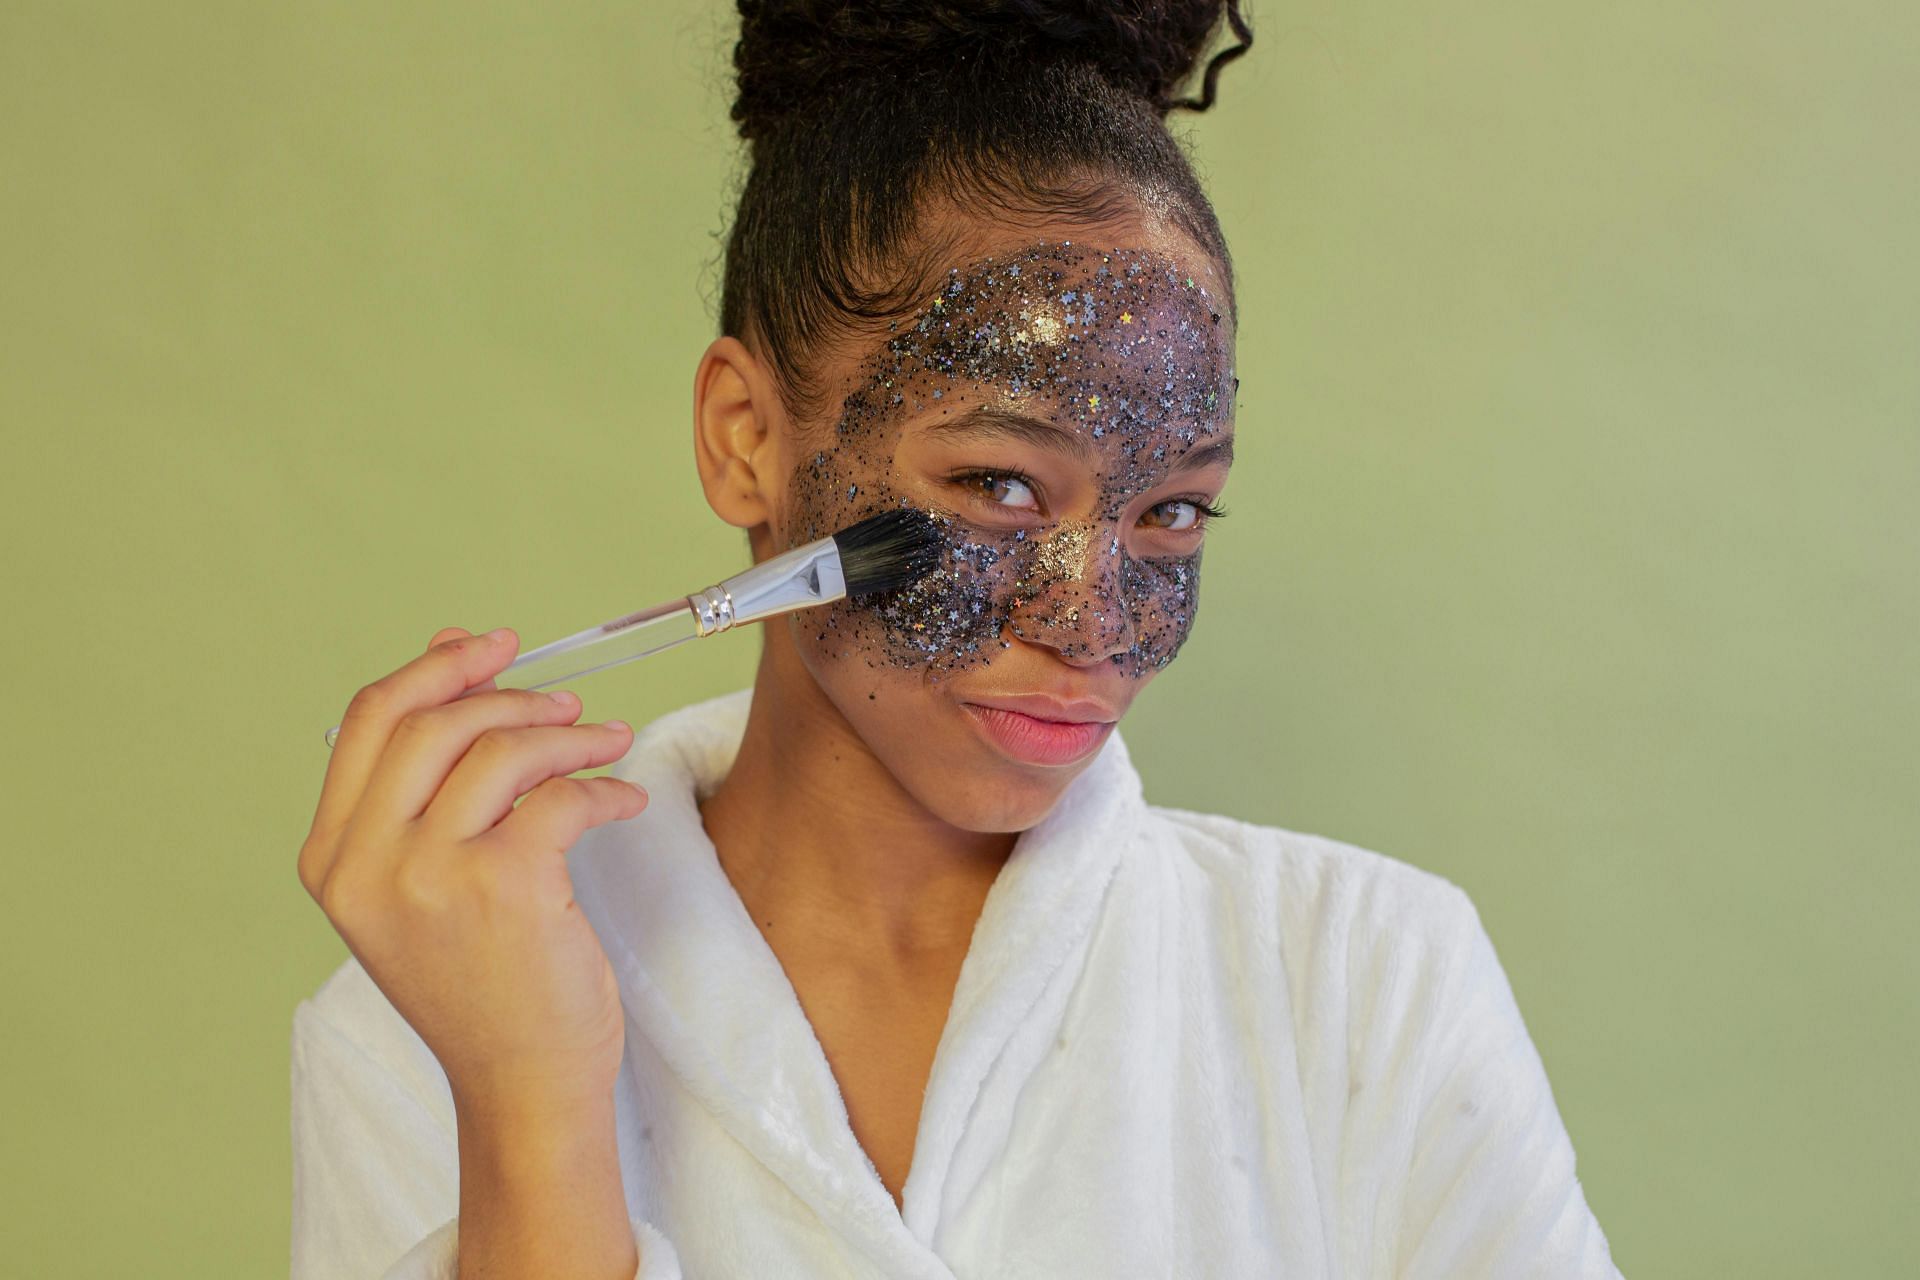 Tips to use a face mask (image sourced via Pexels / Photo by monstera)